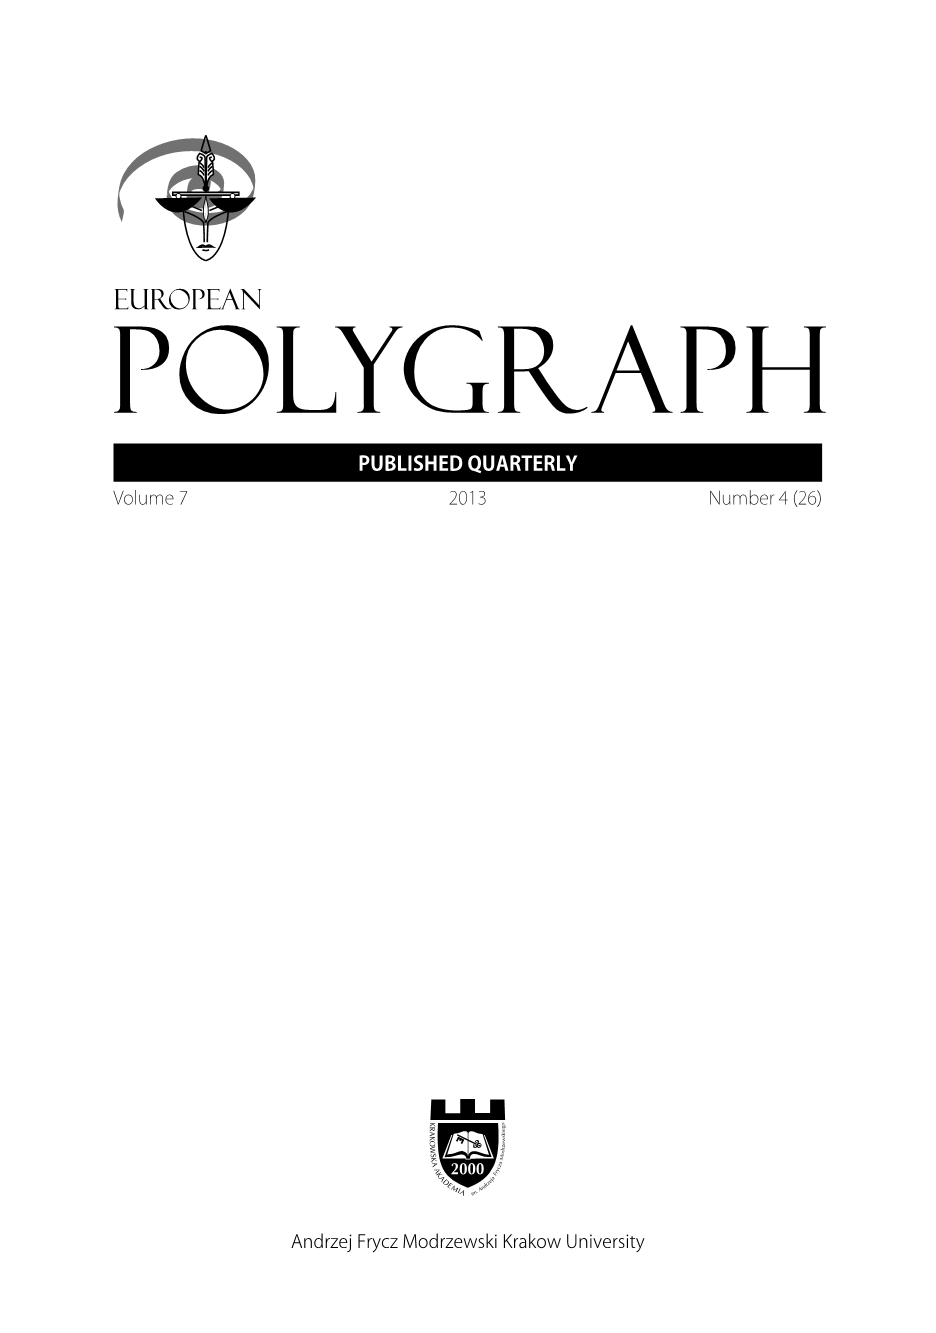 History of Polygraph Examinations in Poland